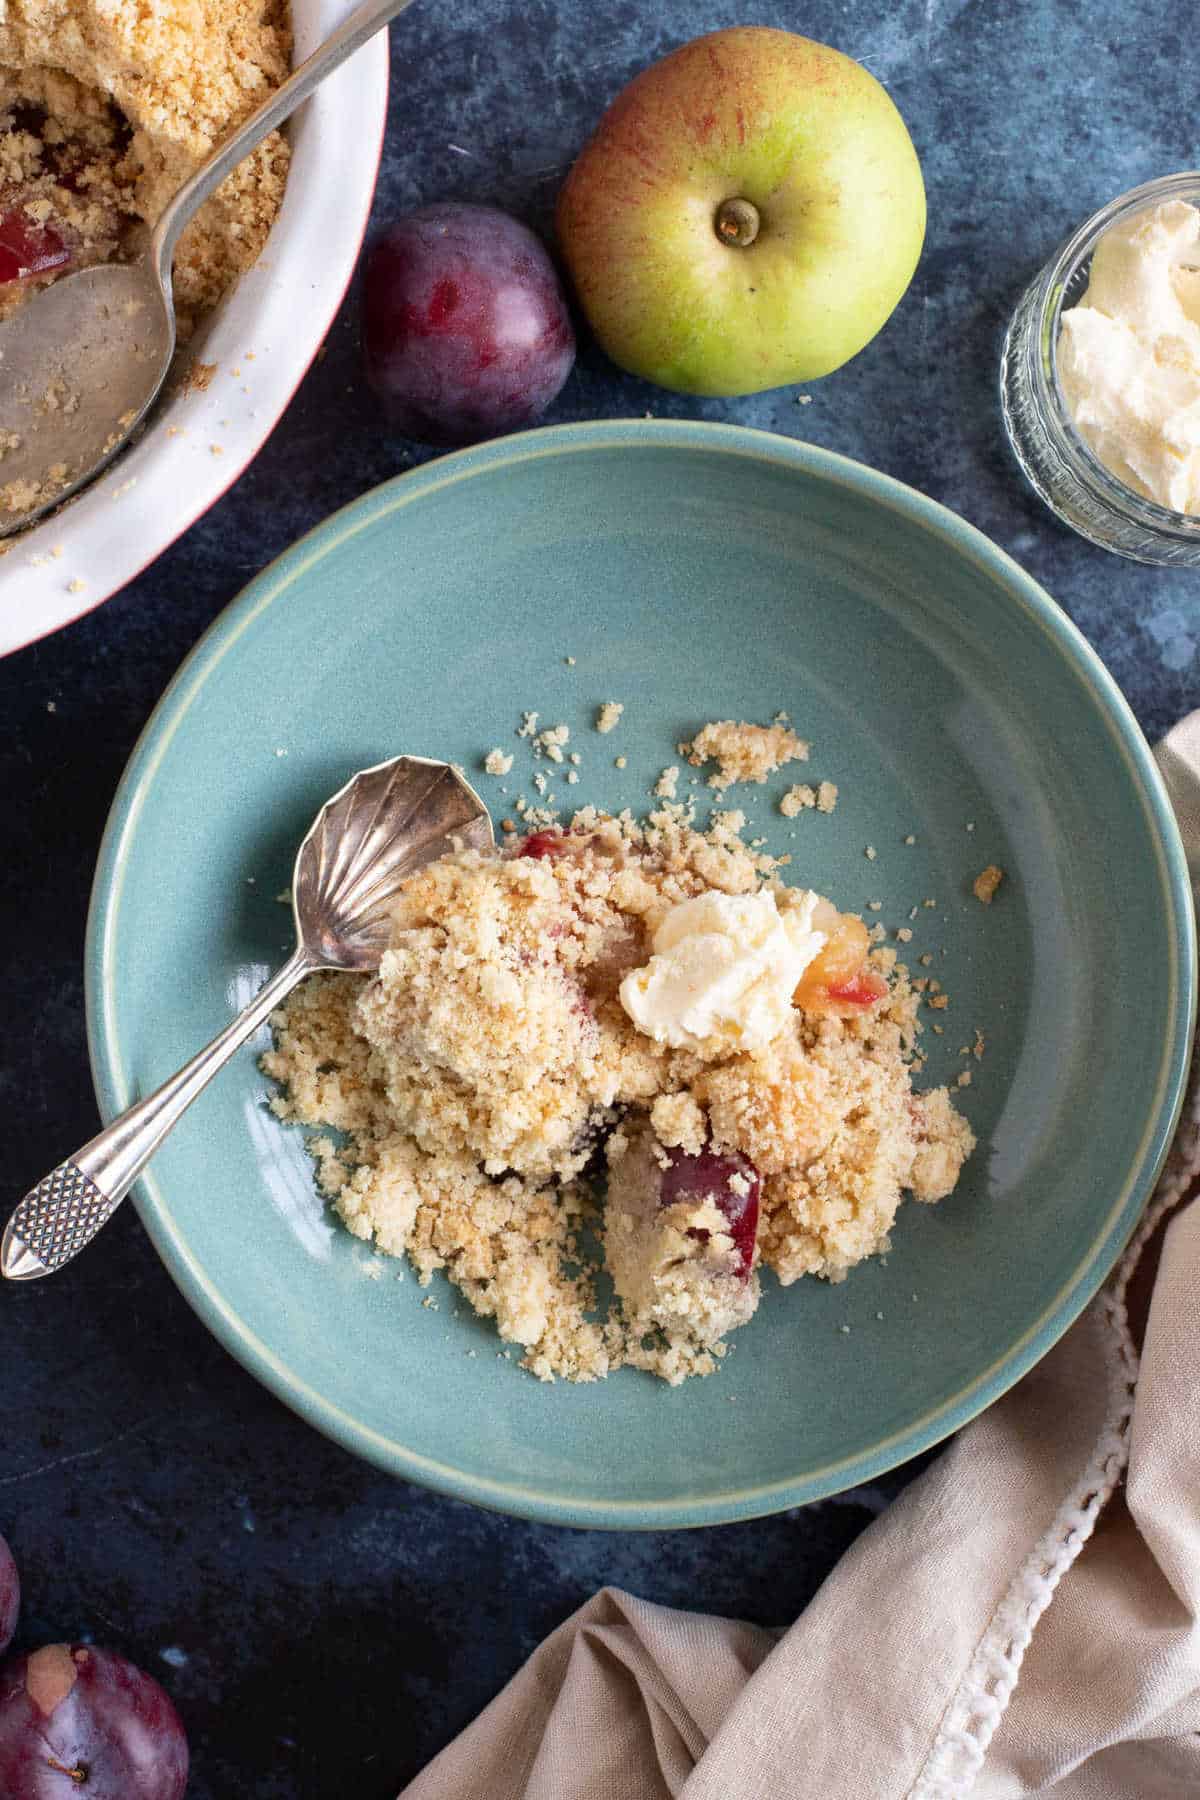 Plum crumble with clotted cream